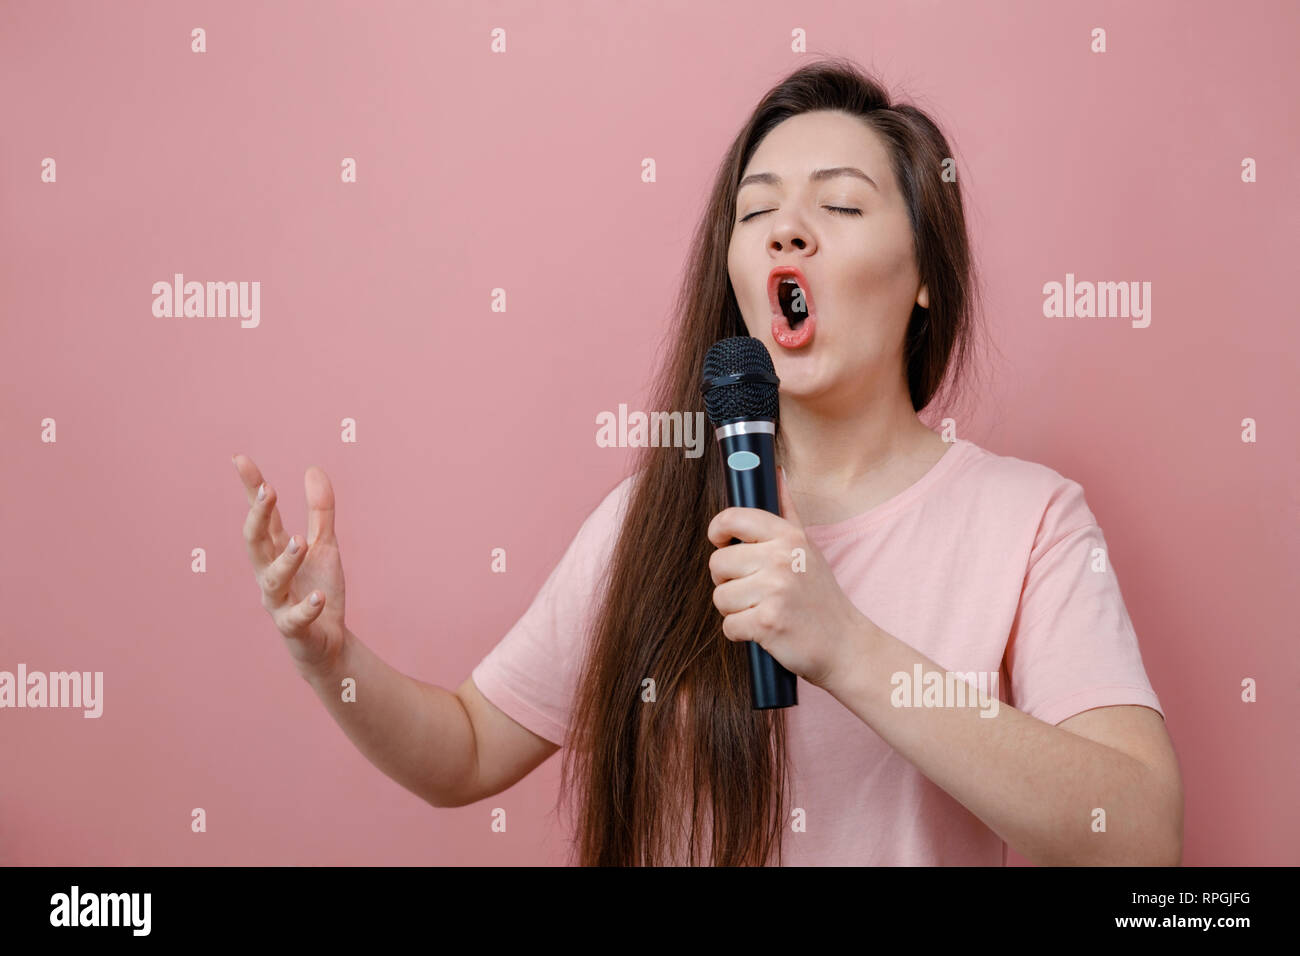 young woman with microphone in hand  on pink background sings like opera singer Stock Photo